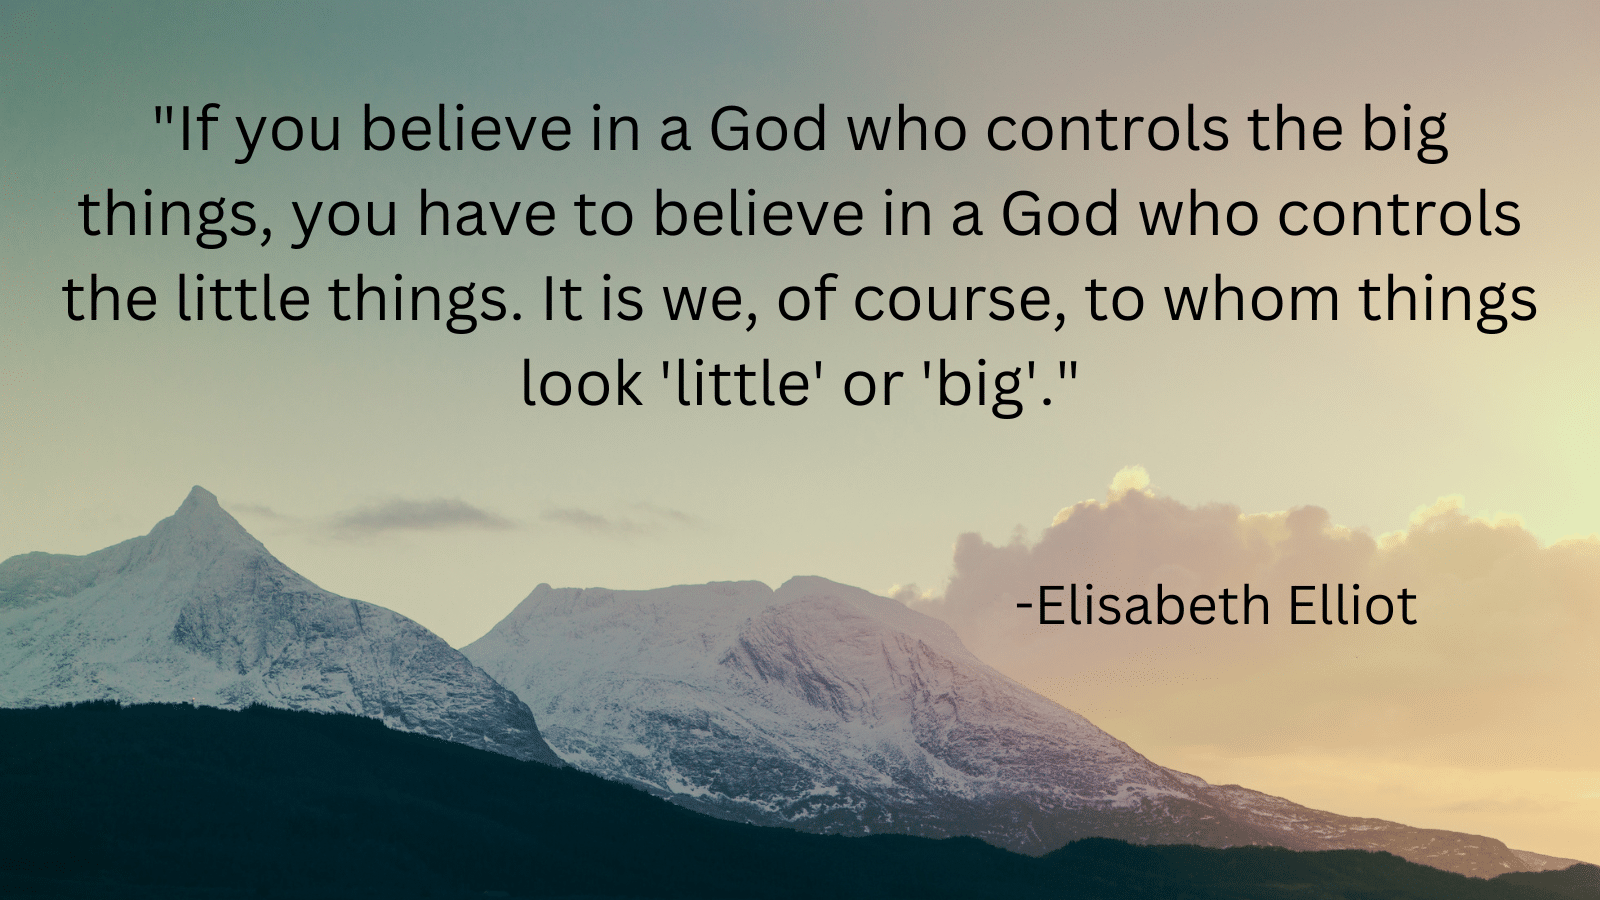 Mountains in the distance with Elisabeth Elliot quote